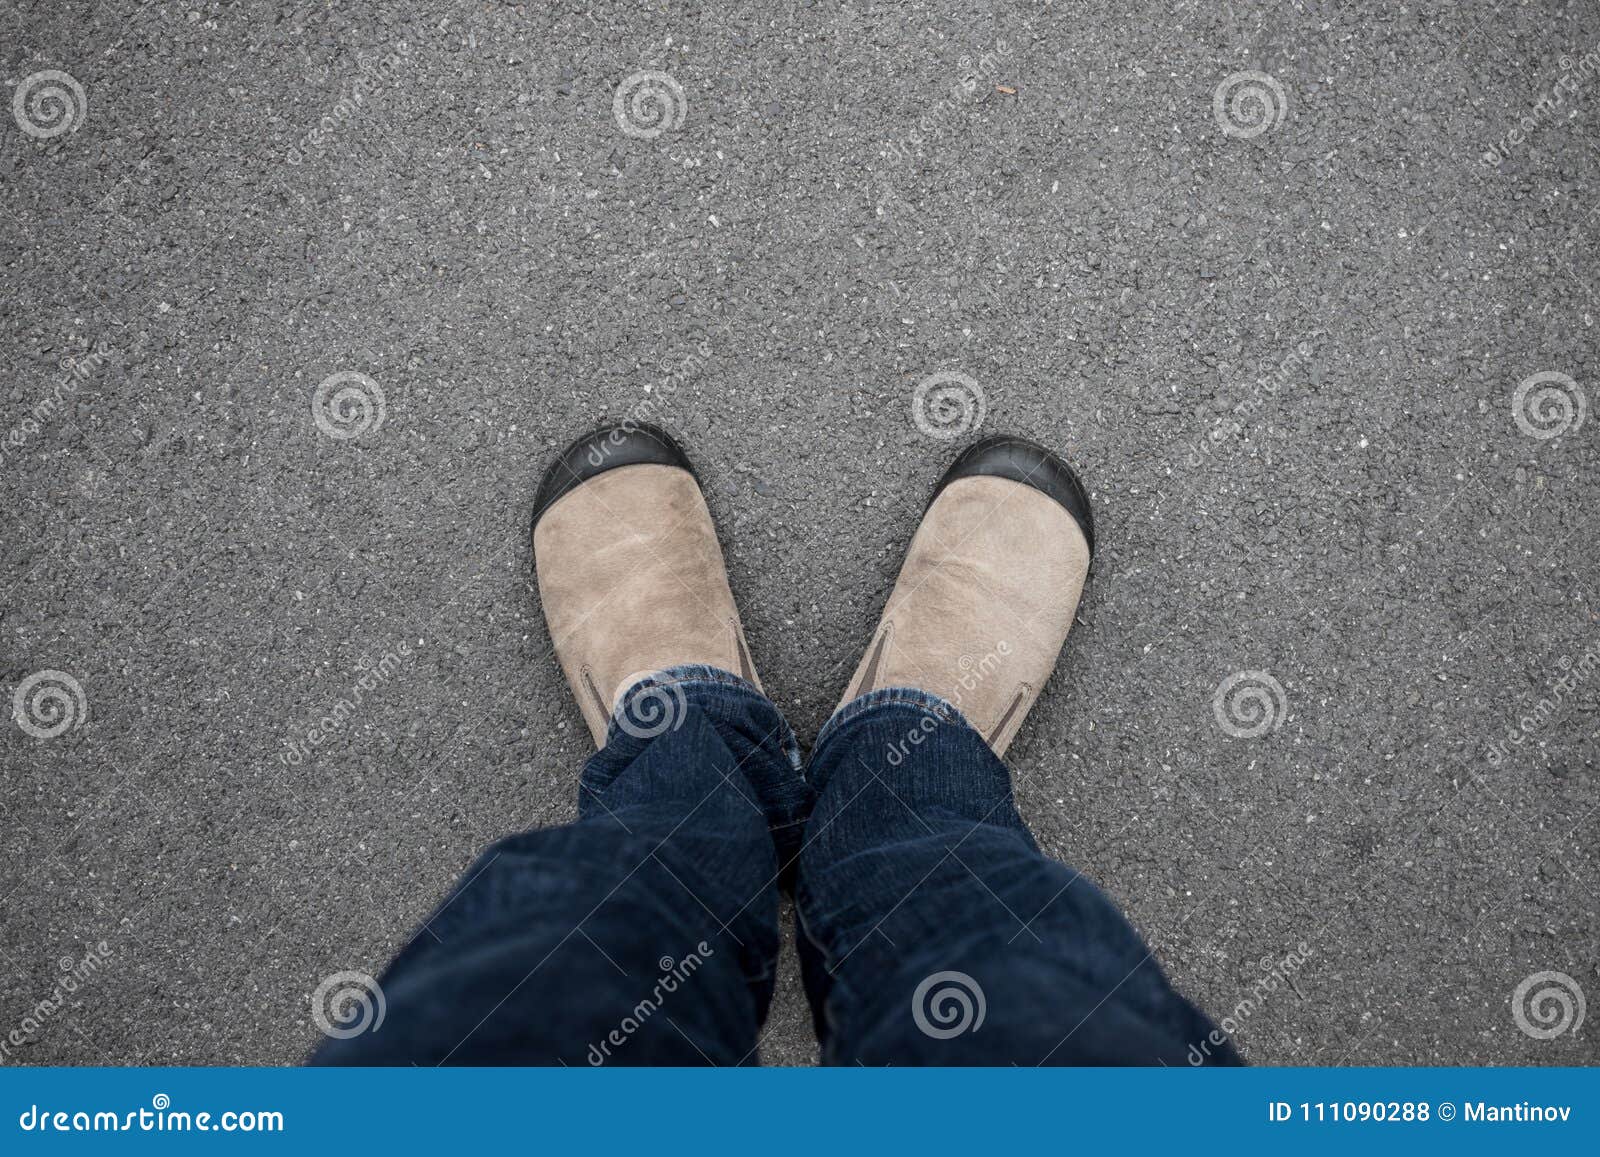 Man Standing on Concrete Floor Stock Photo - Image of failure, jeans ...